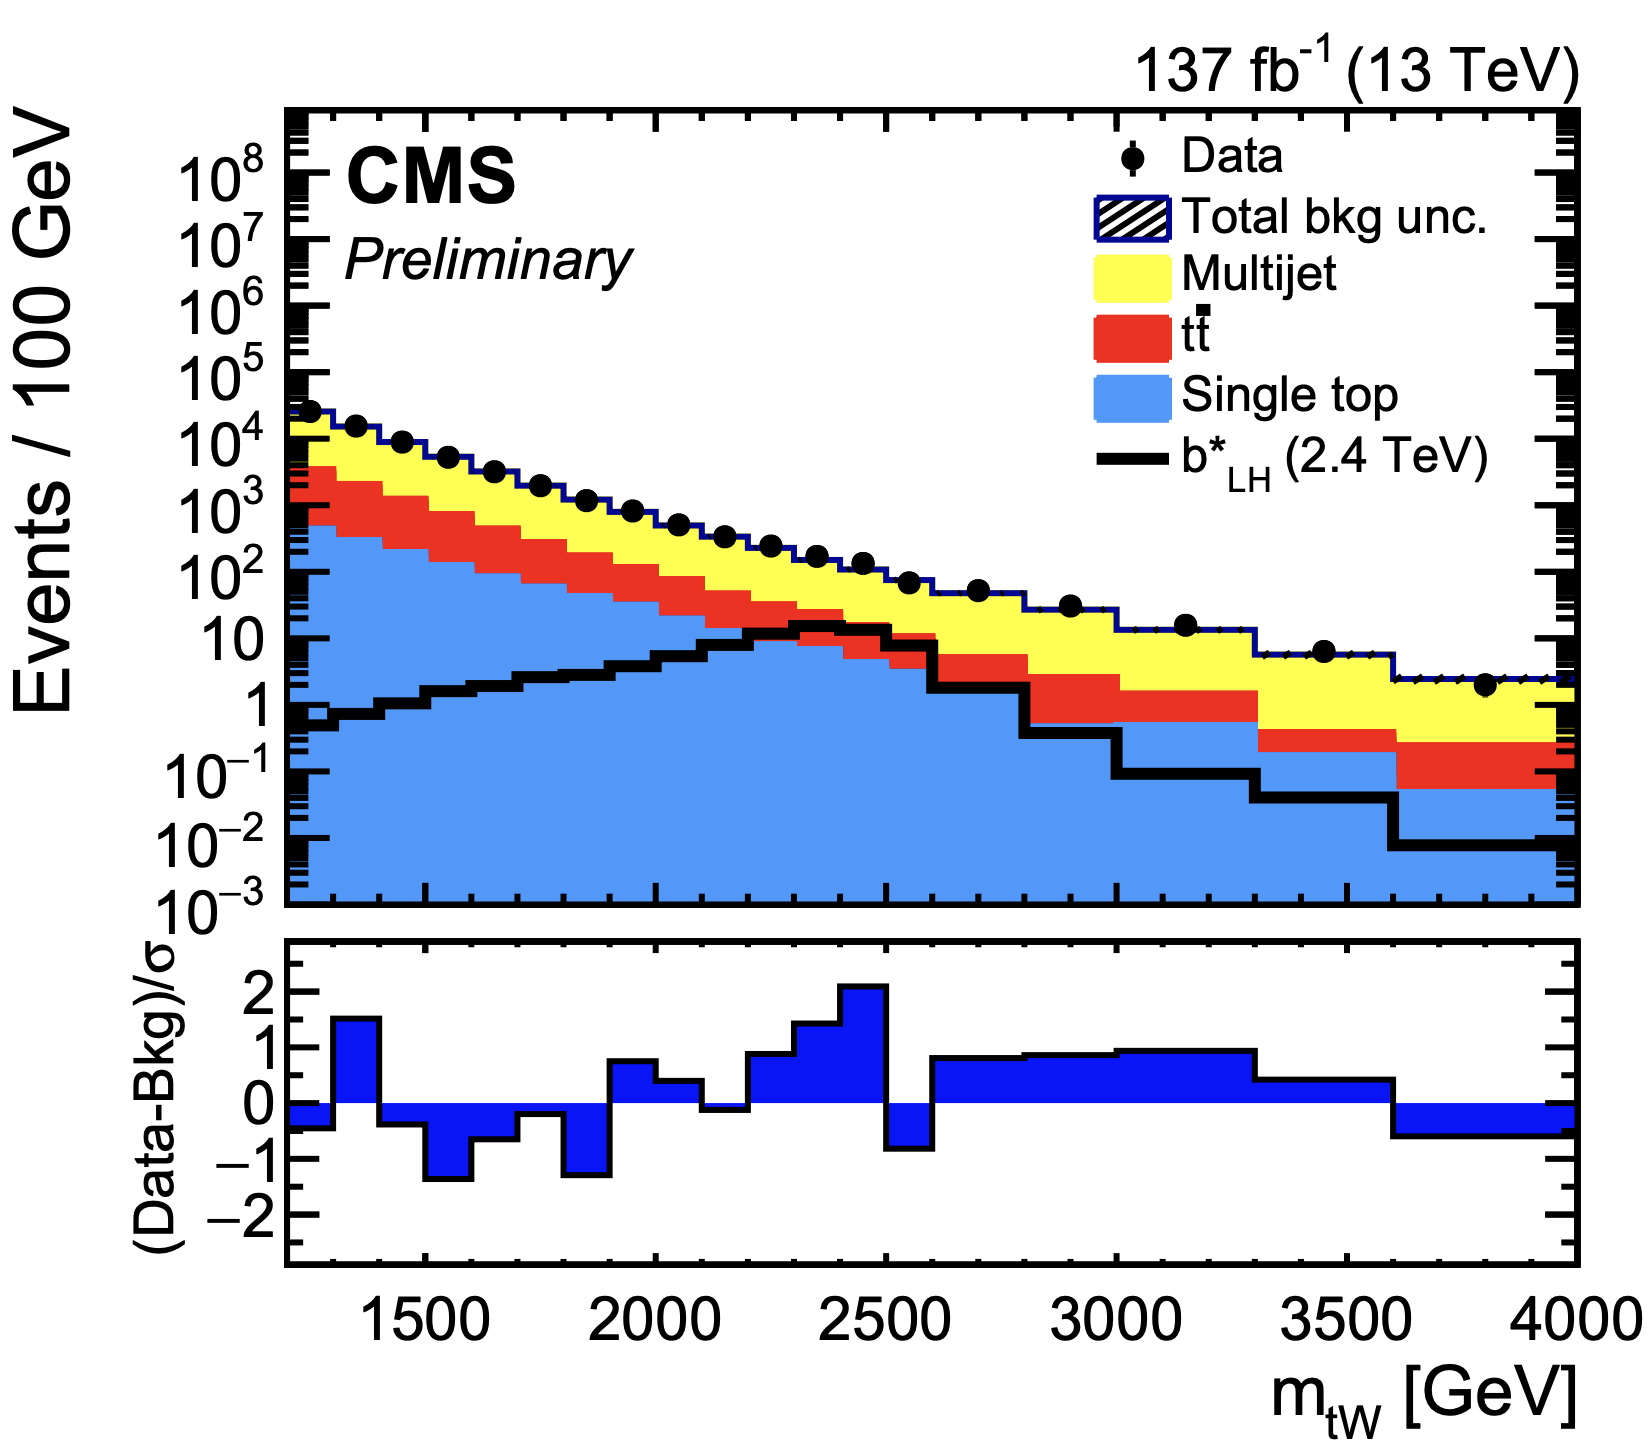 distribution of the invariant mass of t+W as observed by the CMS experiment